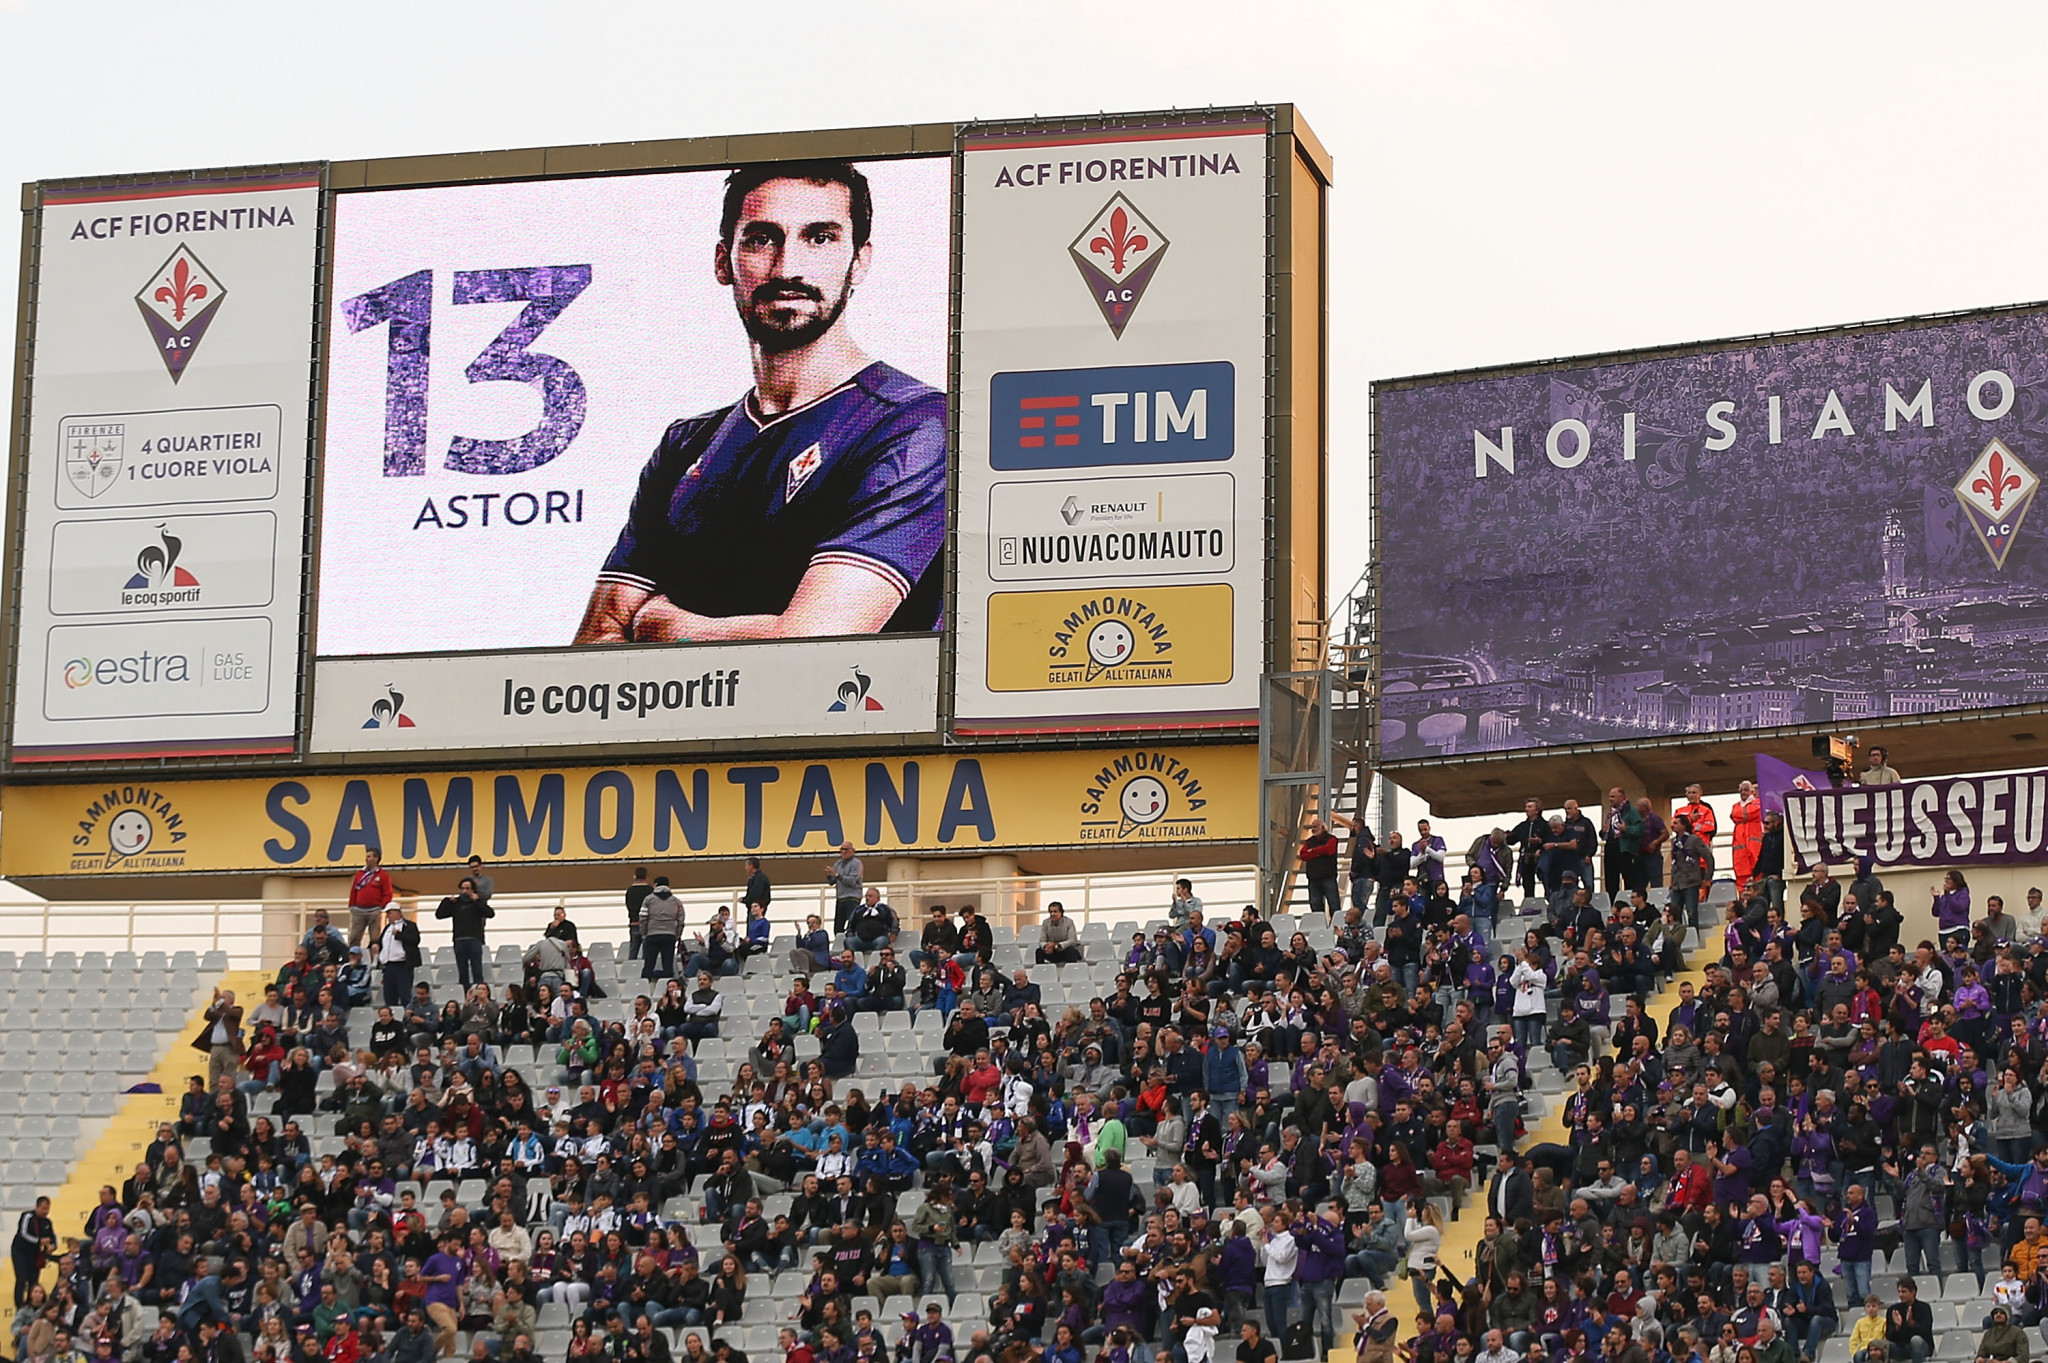 Banners dedicated to Fiorentina's Davide Astori are visible at Serie A matches ©Getty Images